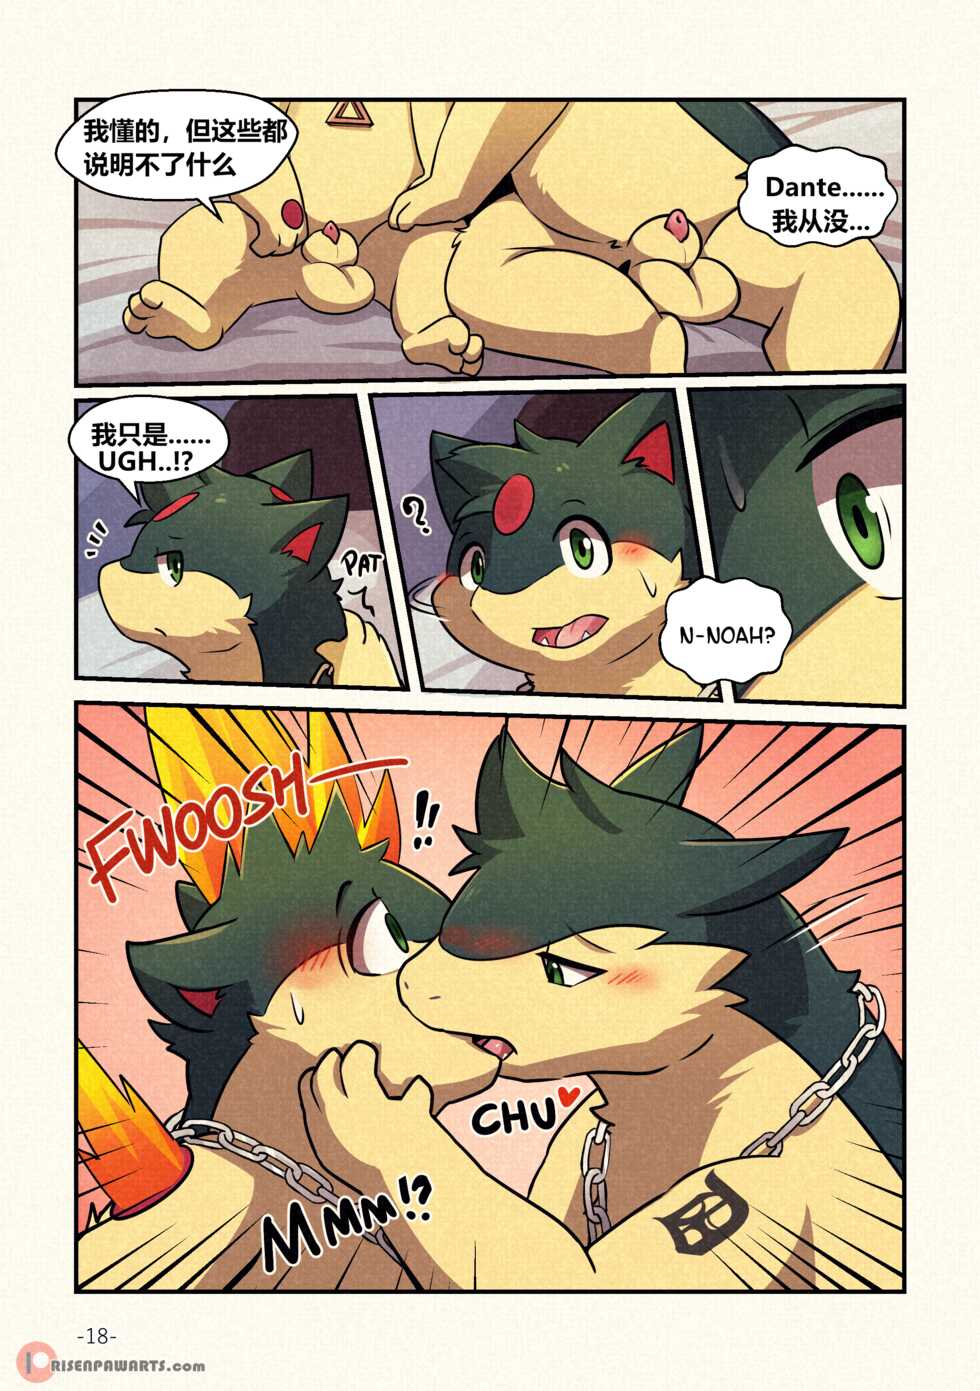 [Risenpaw] Shadow of the Flame - 焰下之影[Bx10ear个人汉化] - Page 17